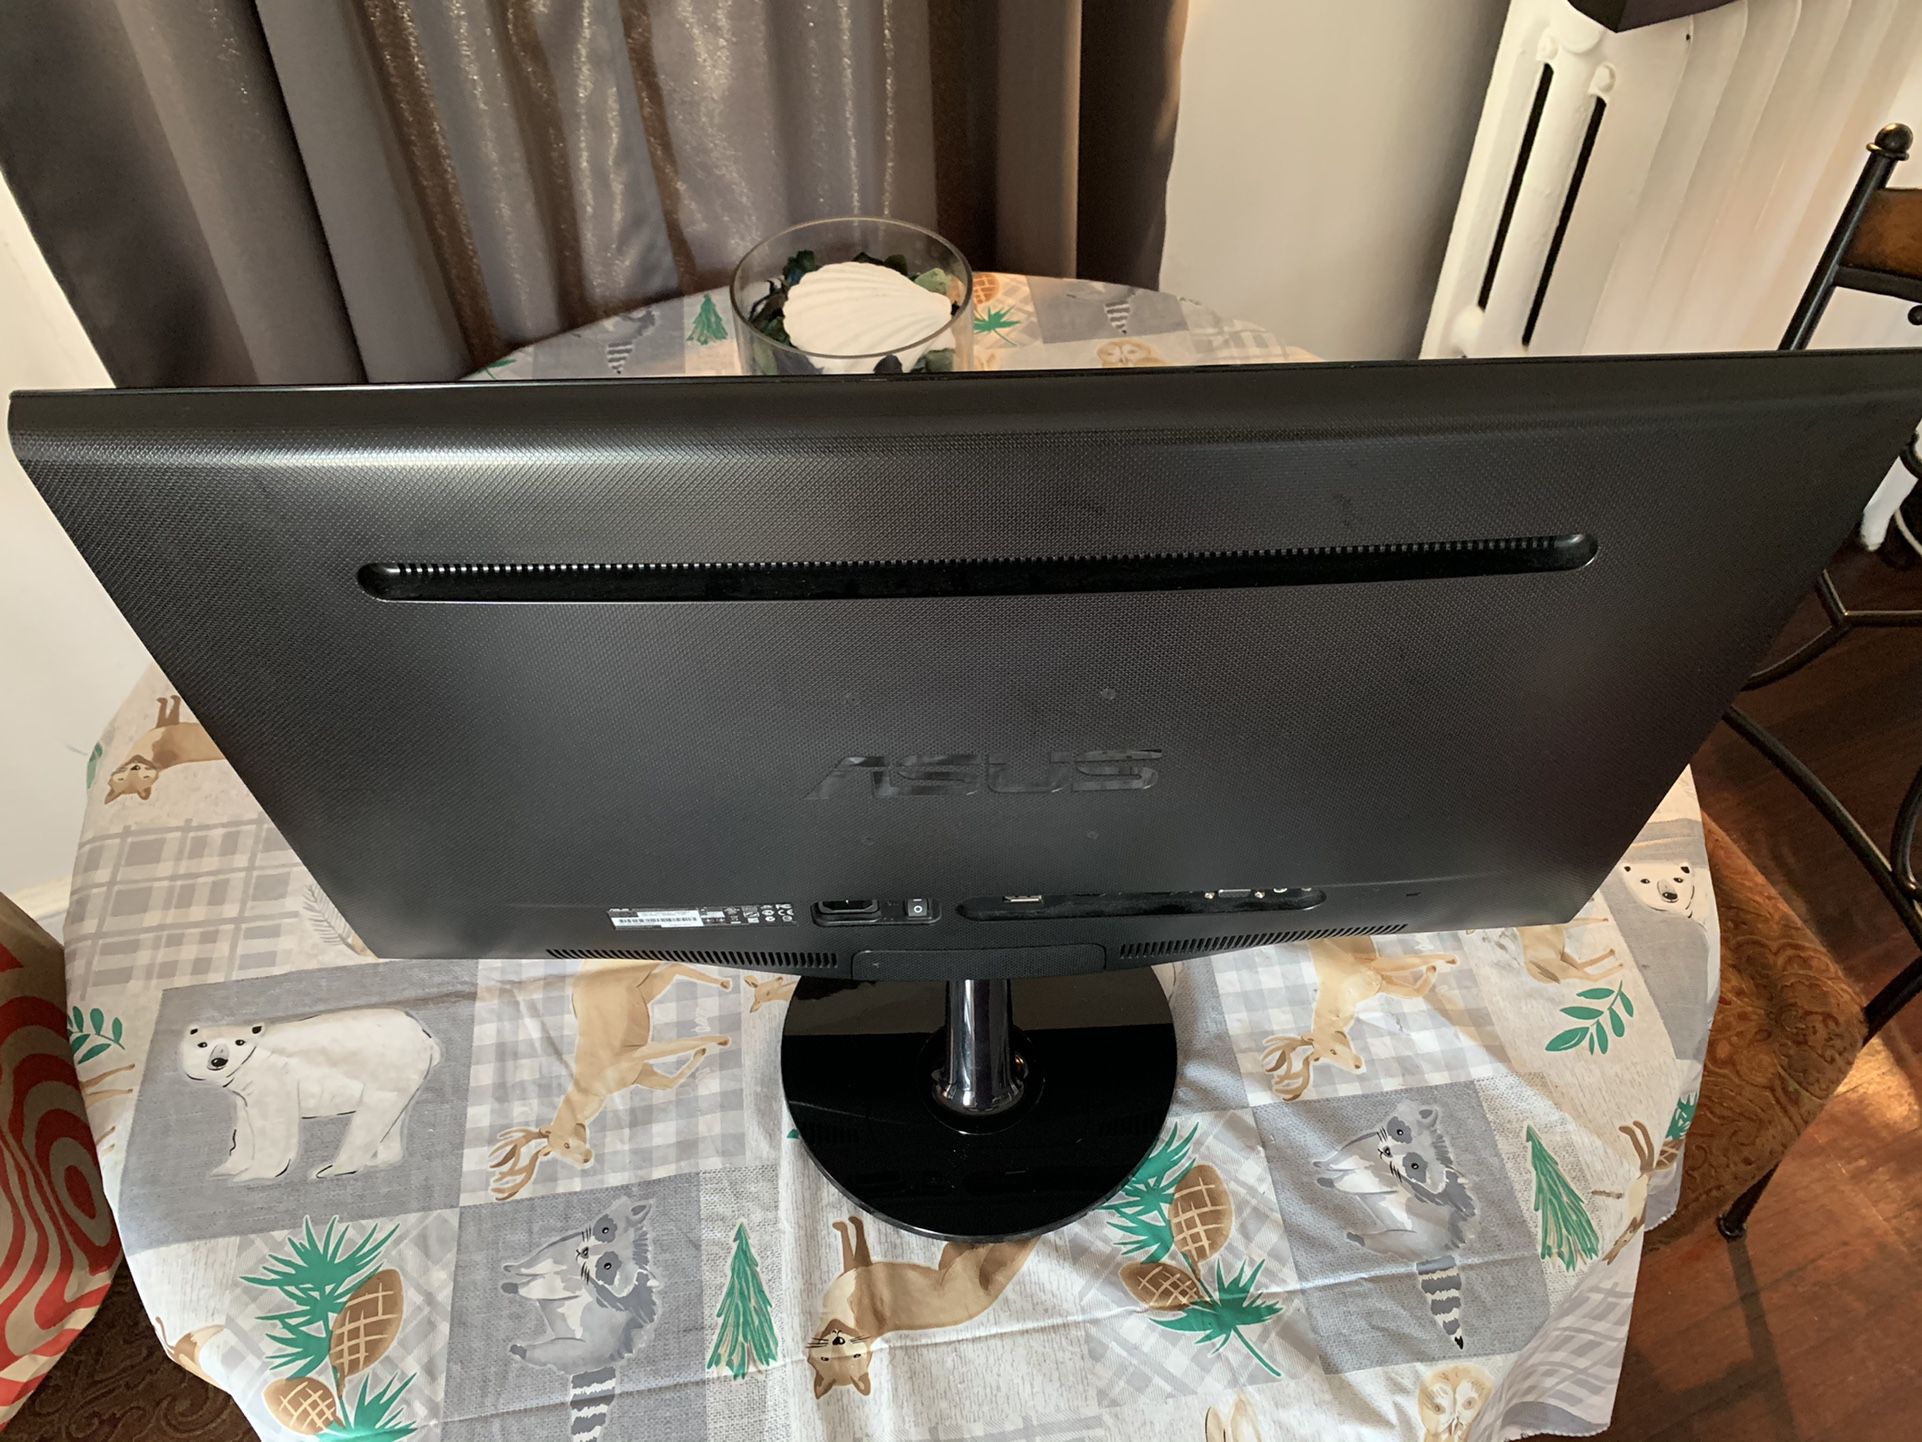 ASUS ROG Swift 360Hz PG259Q 24.5” HDR Gaming Monitor for Sale in Brooklyn,  NY - OfferUp